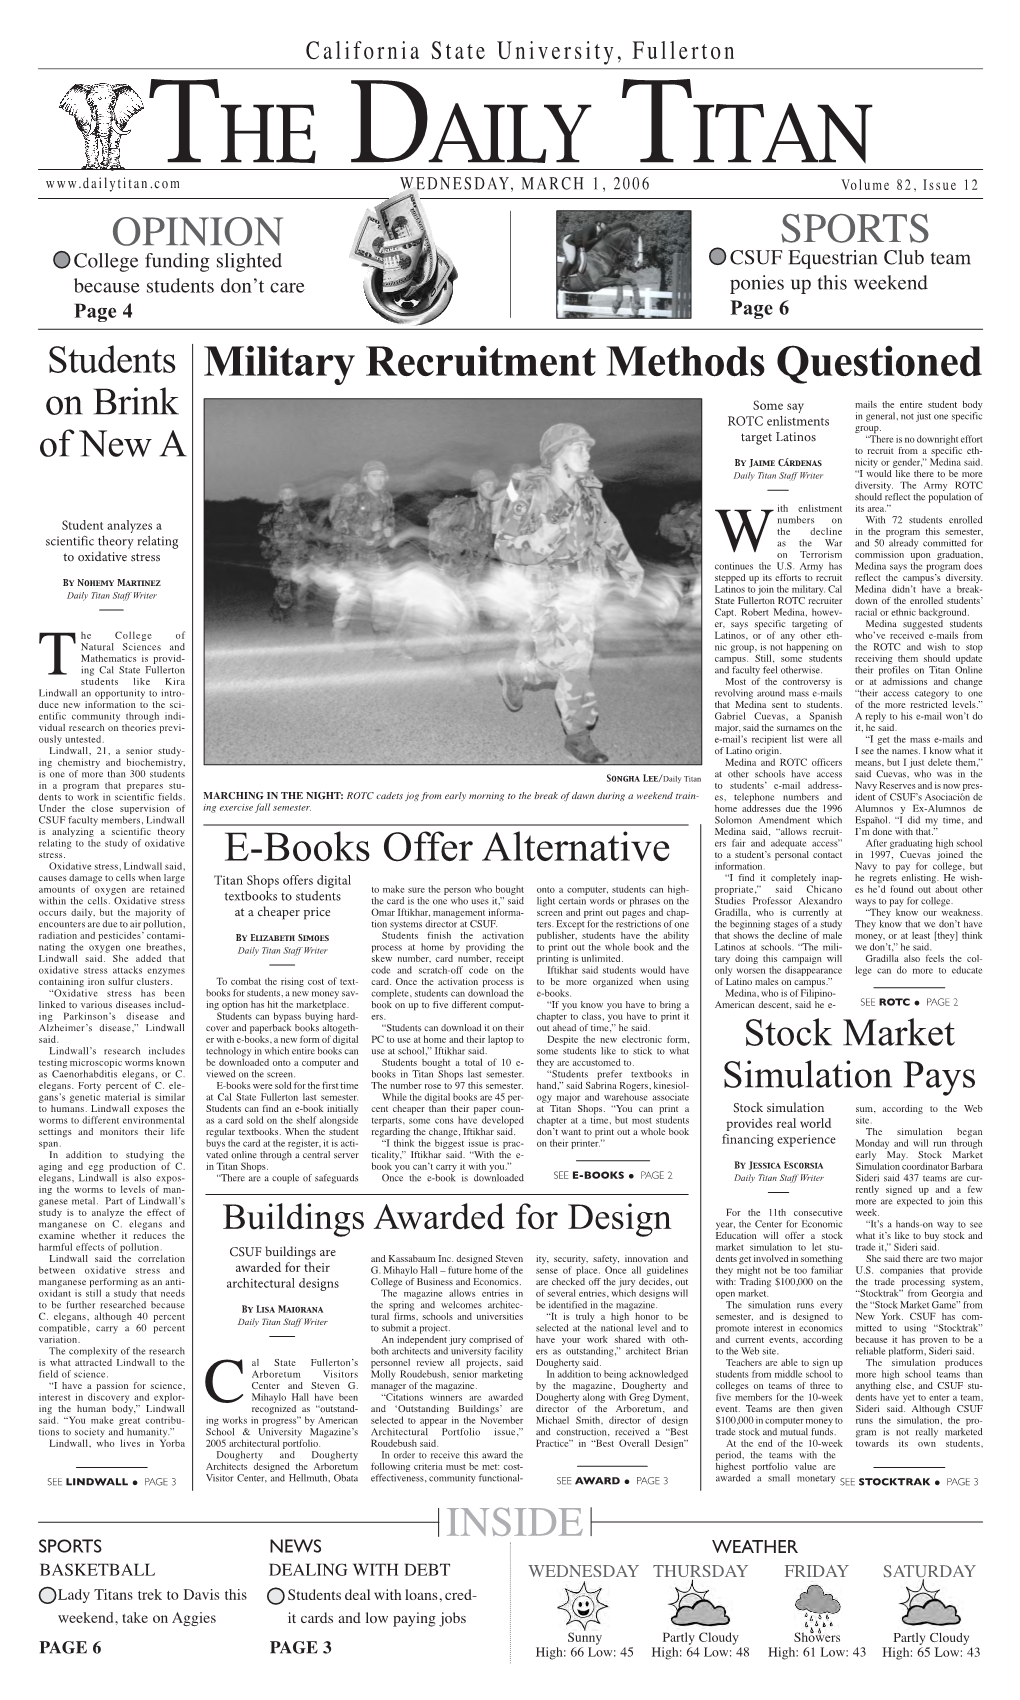 Military Recruitment Methods Questioned